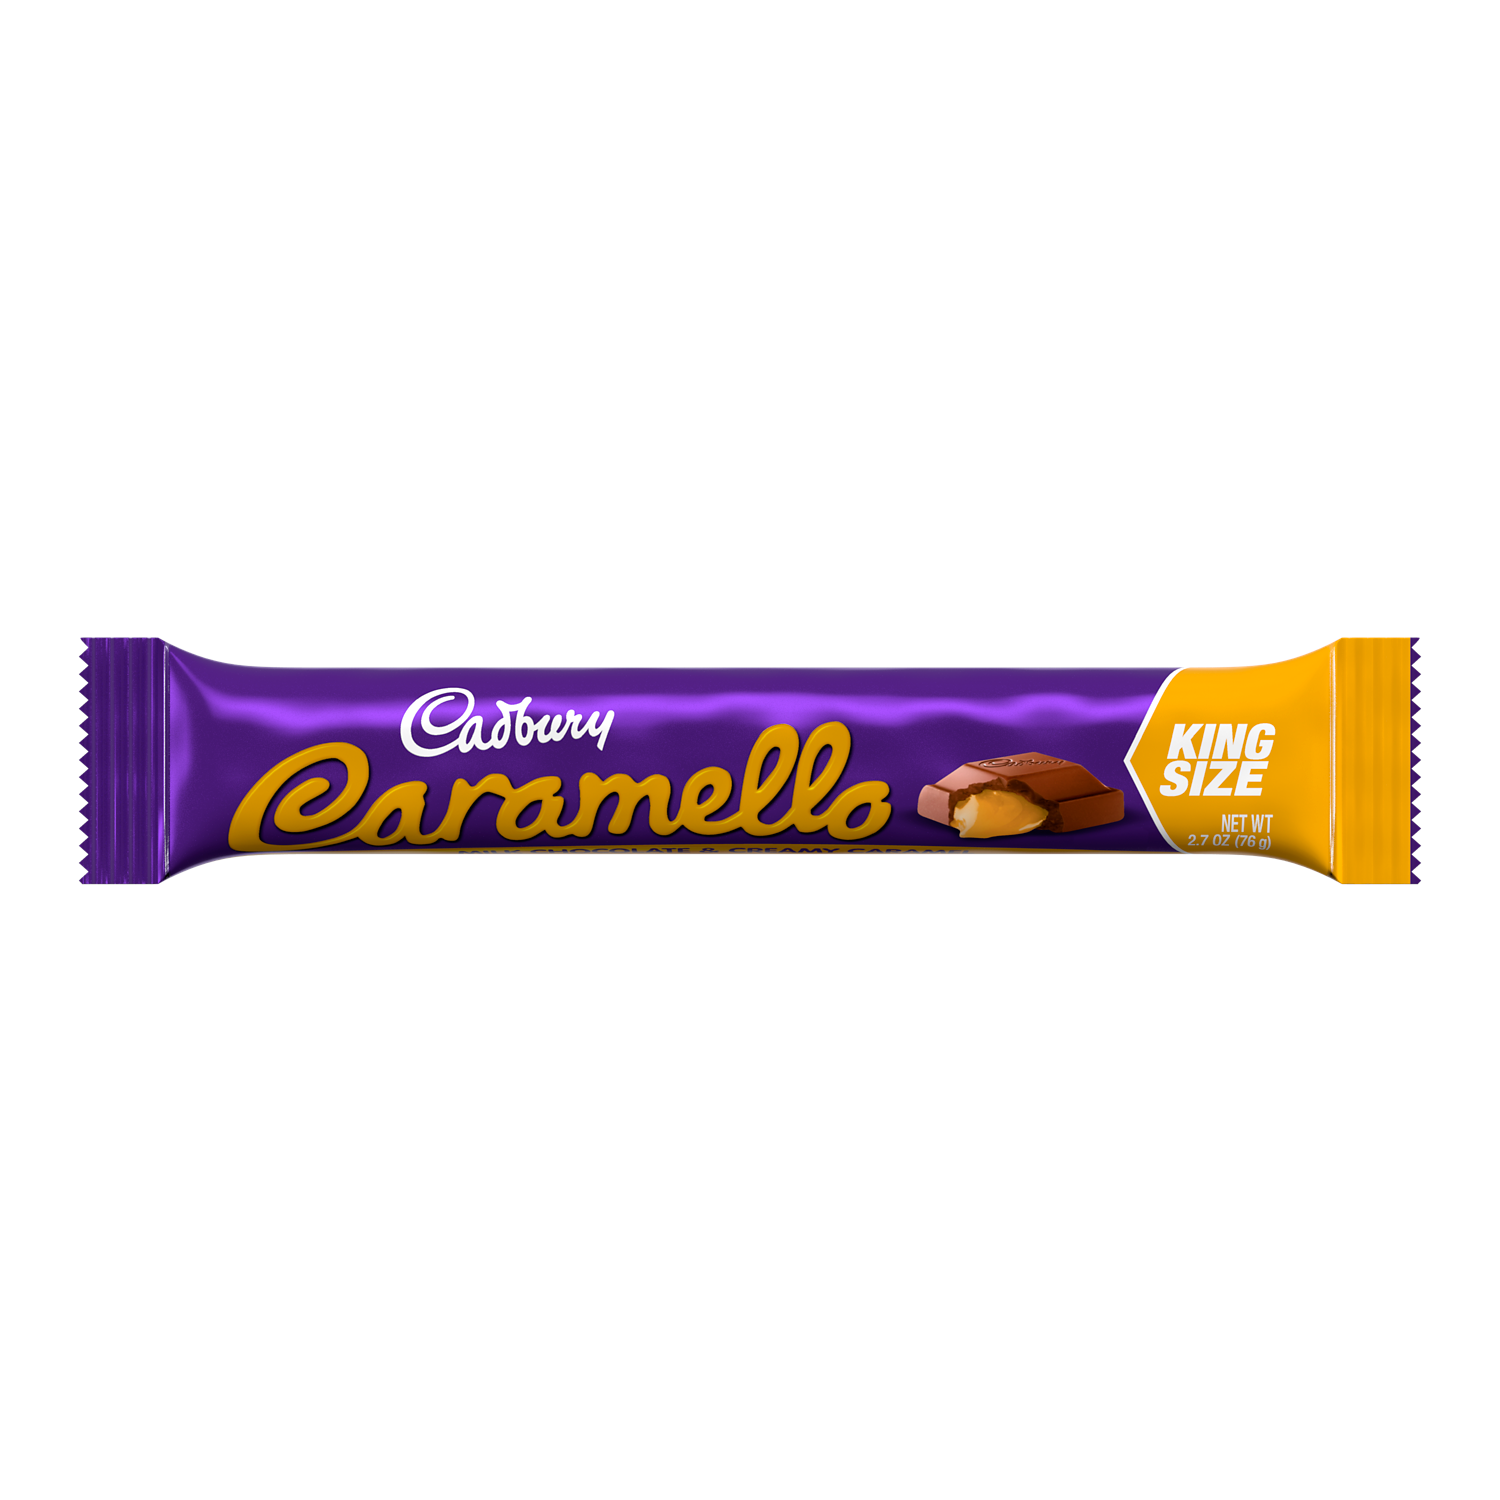 CADBURY CARAMELLO Caramel and Milk Chocolate King Size Candy Bar, 2.7 oz - Front of Package